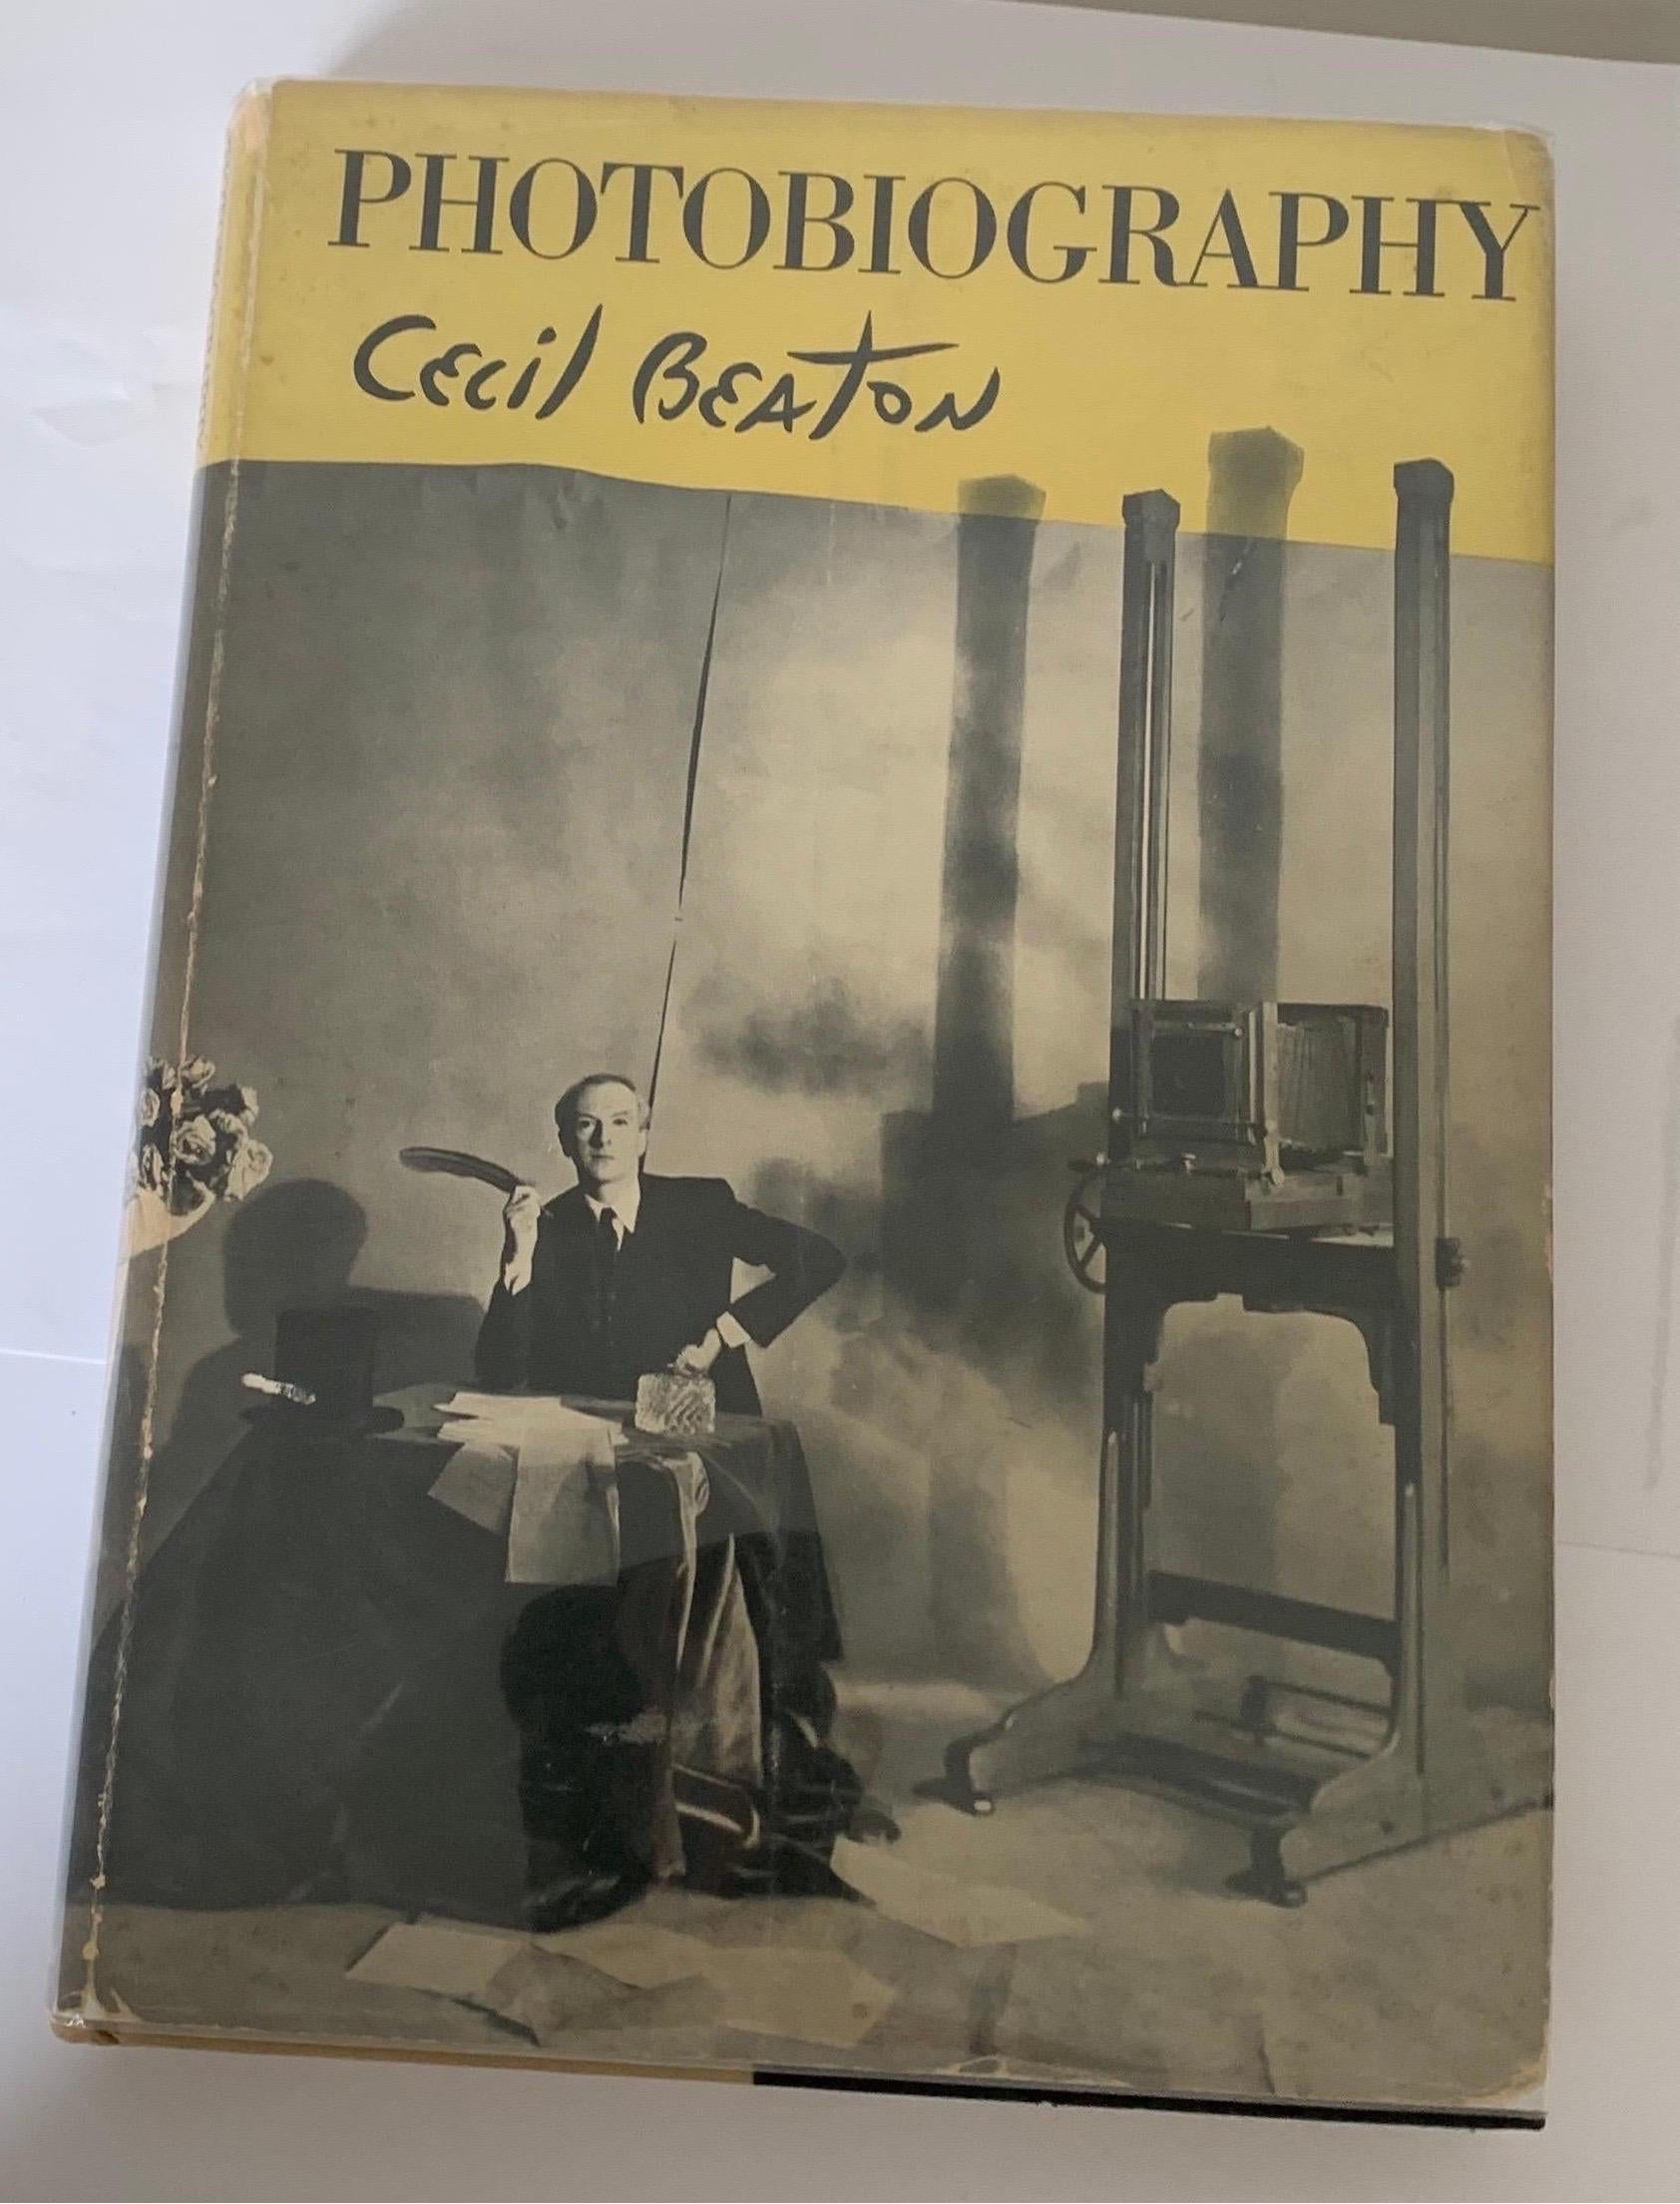 Cecil Beaton photography hardcover book first edition 1951. Includes dust jacket. Dust jacket has been wrapped in Mylar.